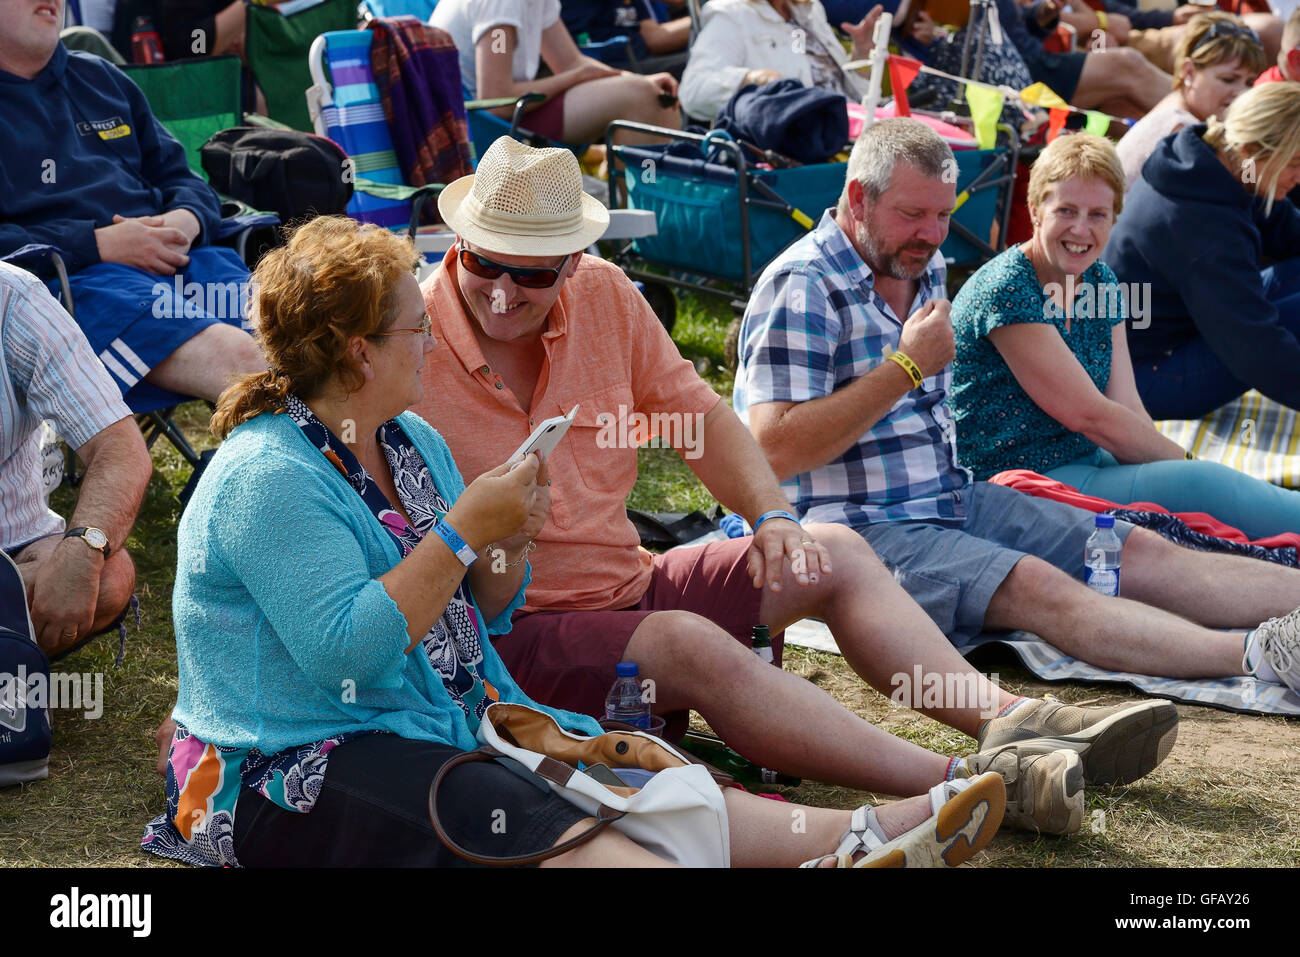 Carfest North, Bolesworth, Cheshire, UK. 30th July 2016. People relaxing at the Main stage. The event is the brainchild of Chris Evans and features 3 days of cars, music and entertainment with profits being donated to the charity Children in Need. Andrew Paterson/Alamy Live News Stock Photo